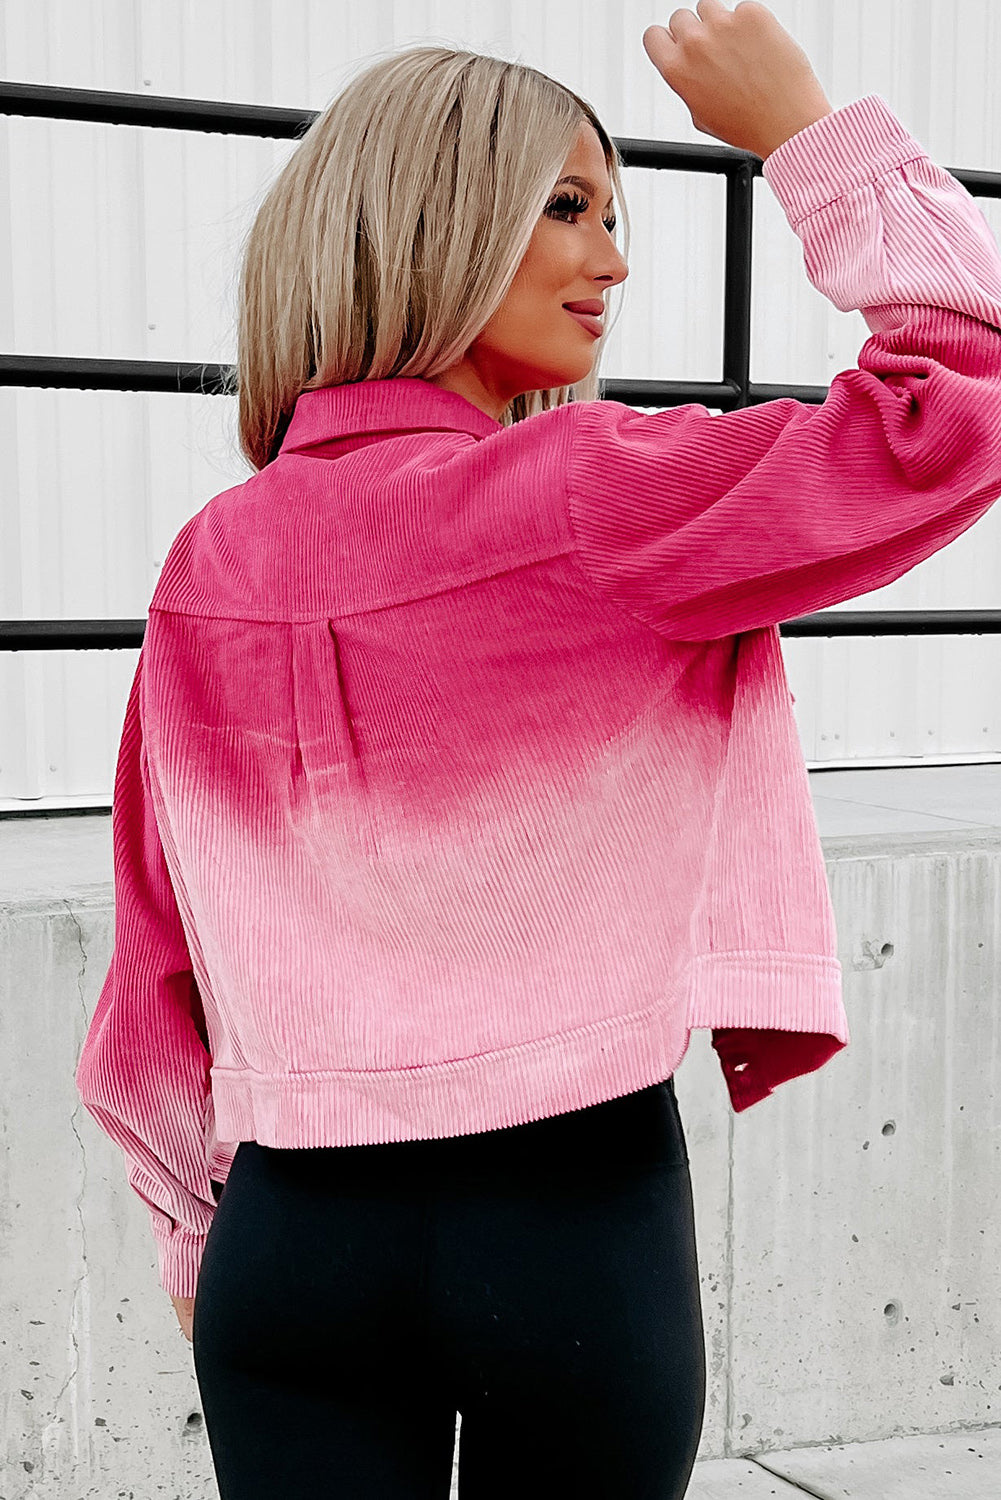 Barbie Style Pink Ombre Flap Pocket Buttoned Ribbed Corduroy Jacket Outerwear JT's Designer Fashion